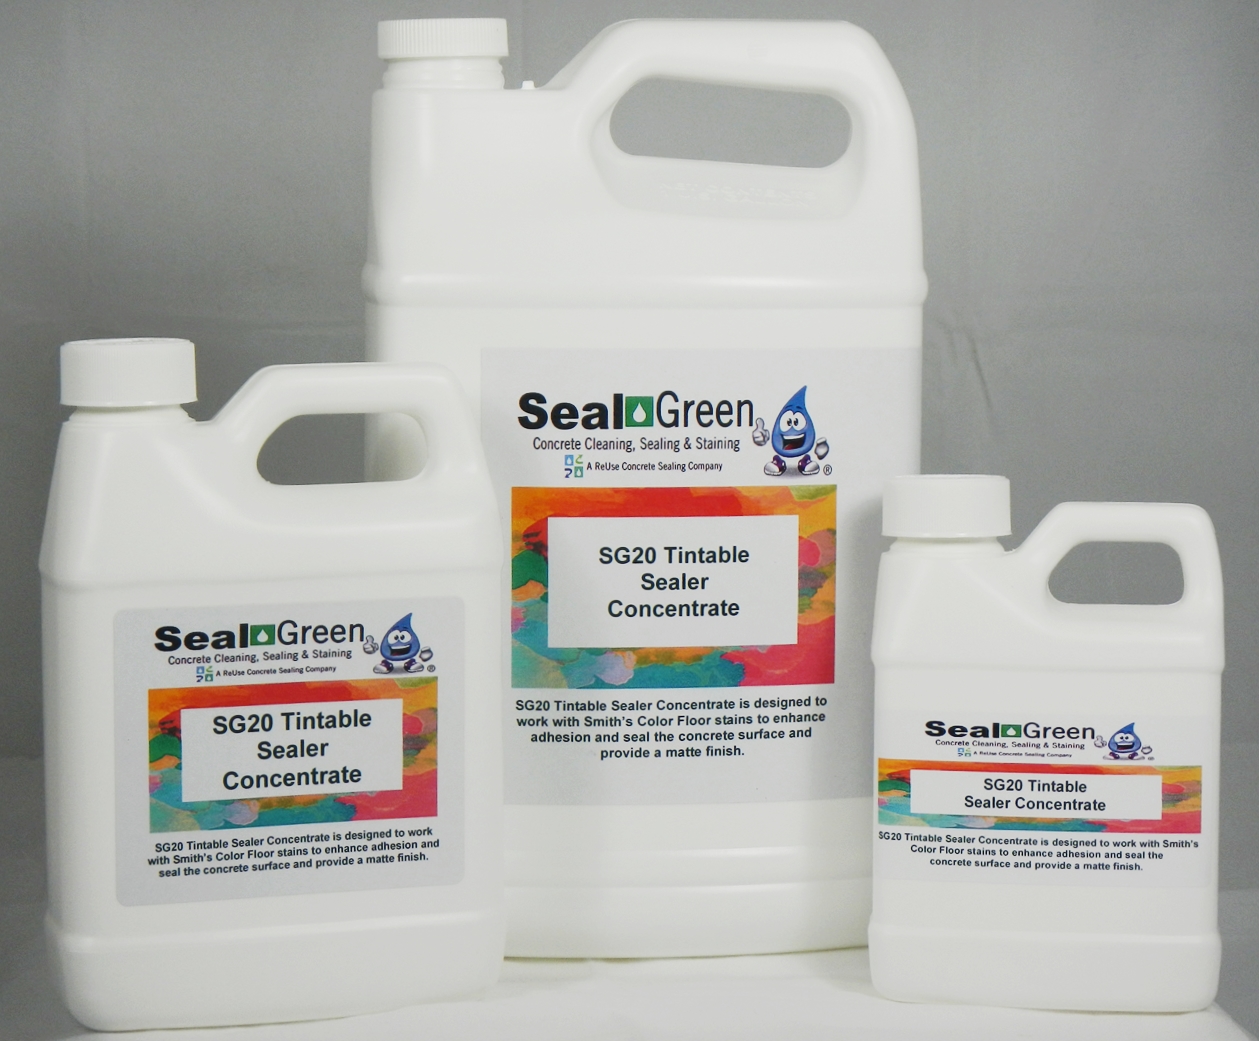 SG20 Tintable Sealer with Salt Defense Technology Questions & Answers